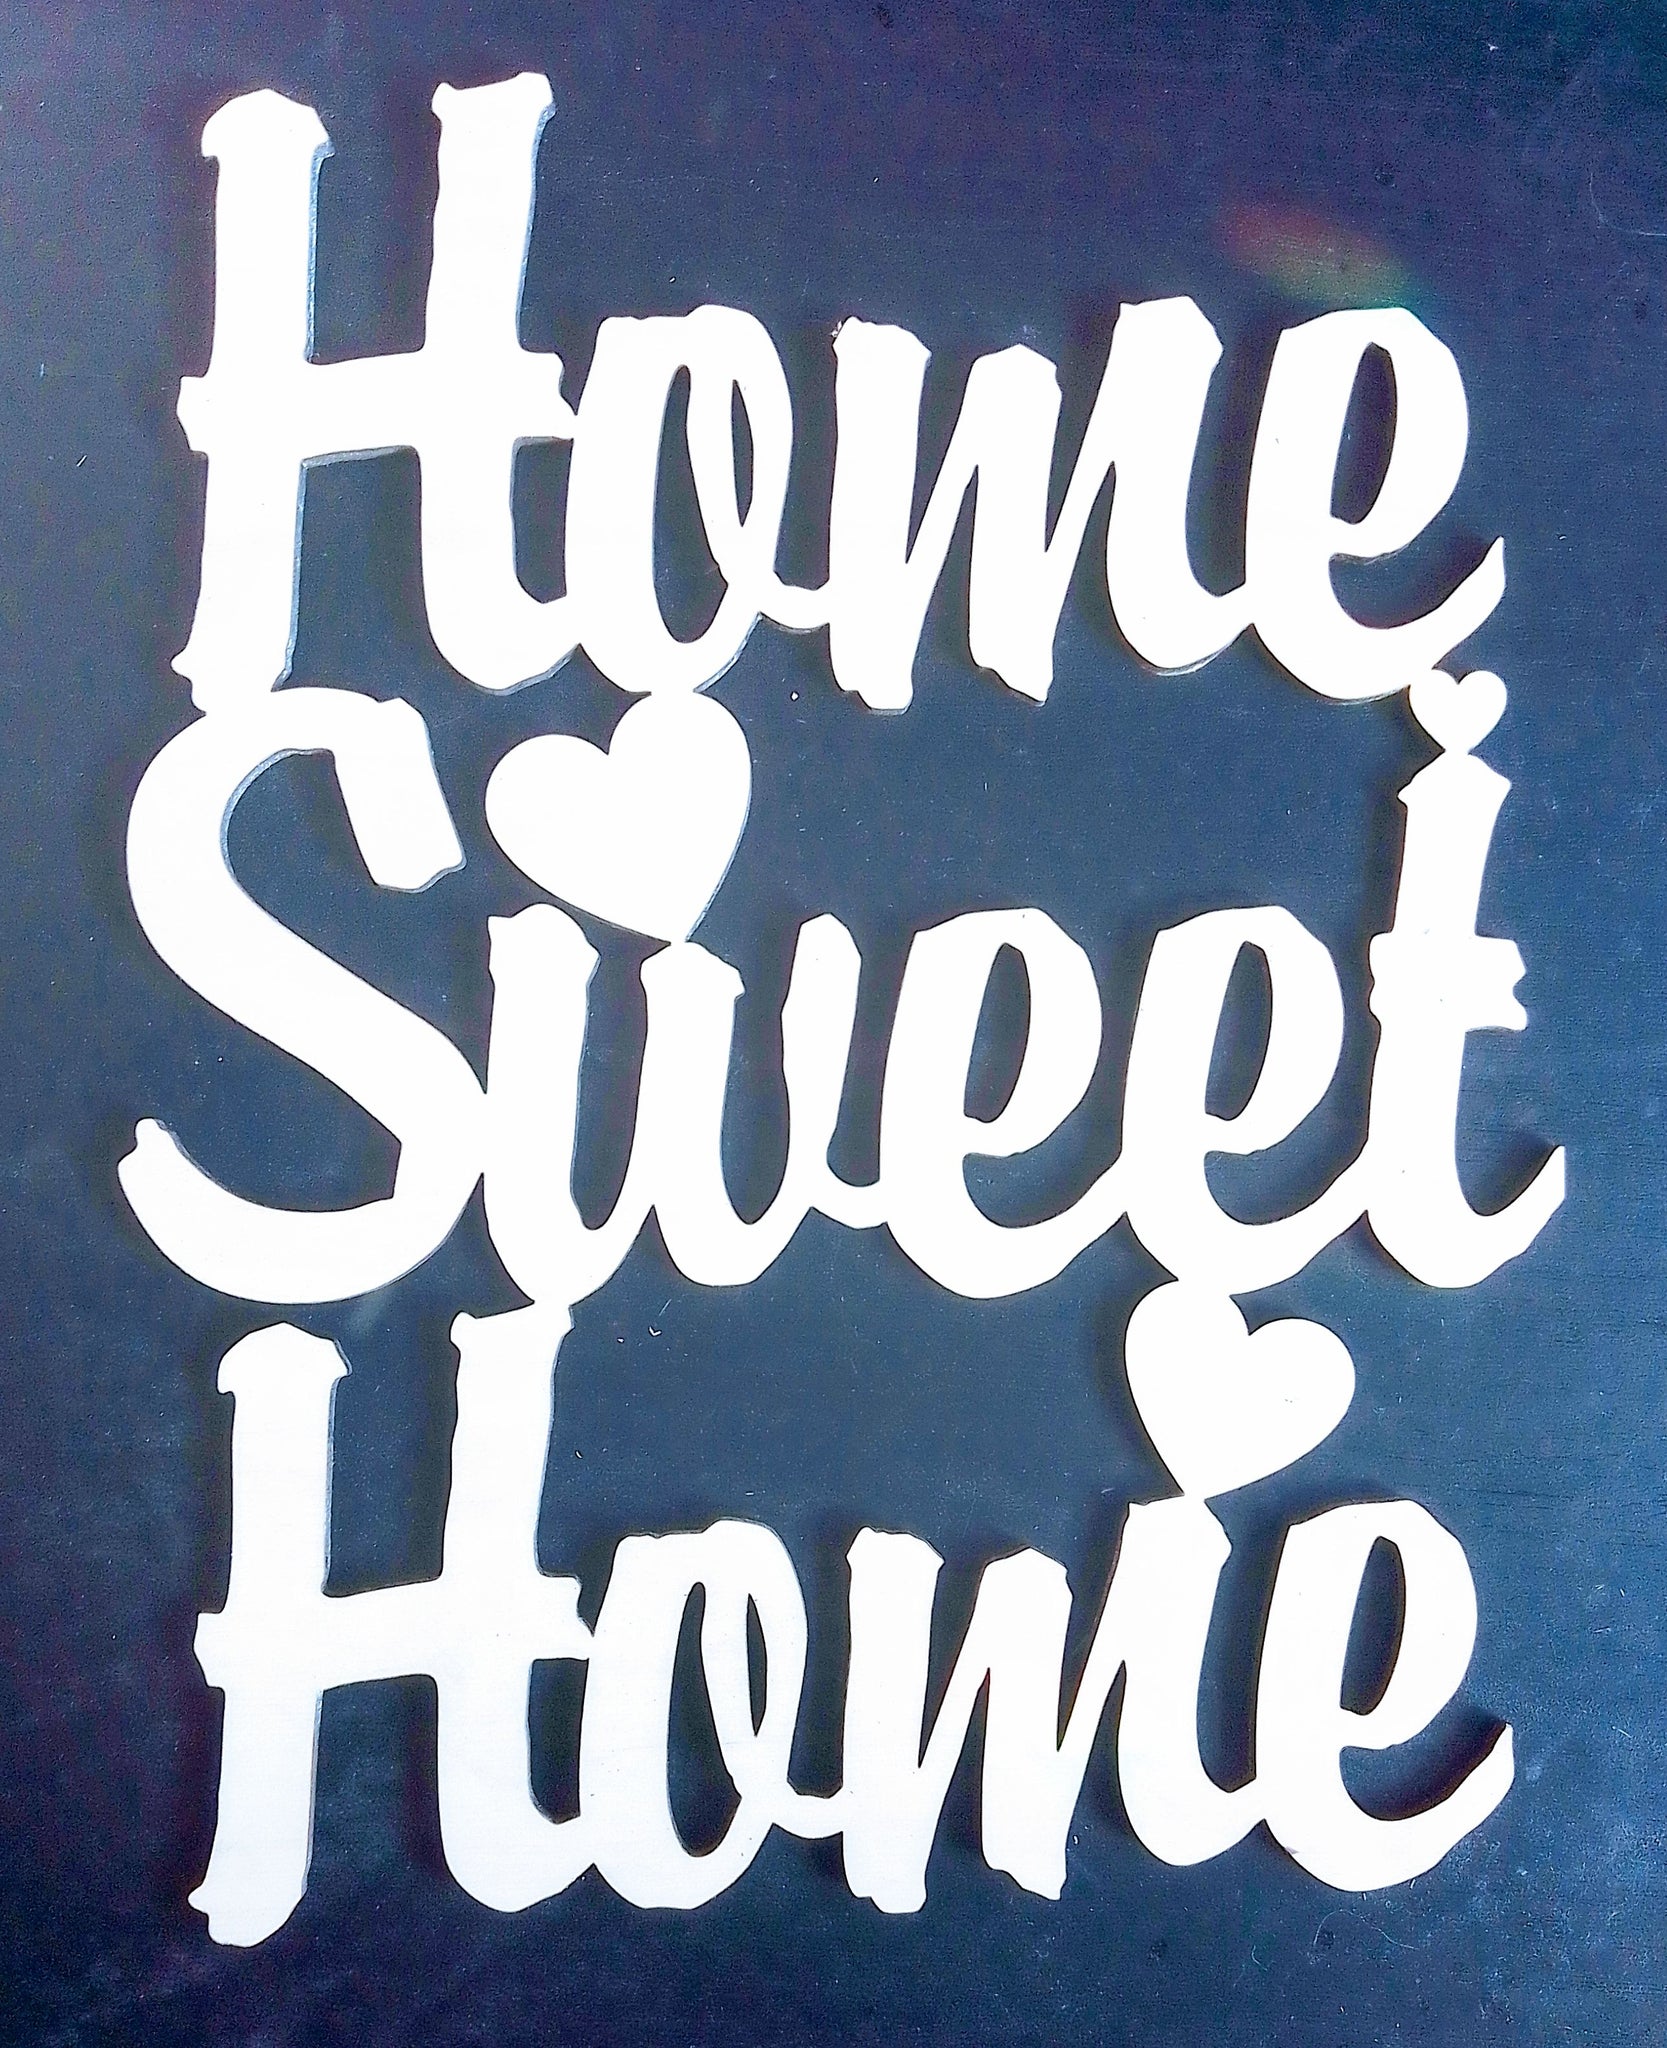 Home Sweet Home plaque